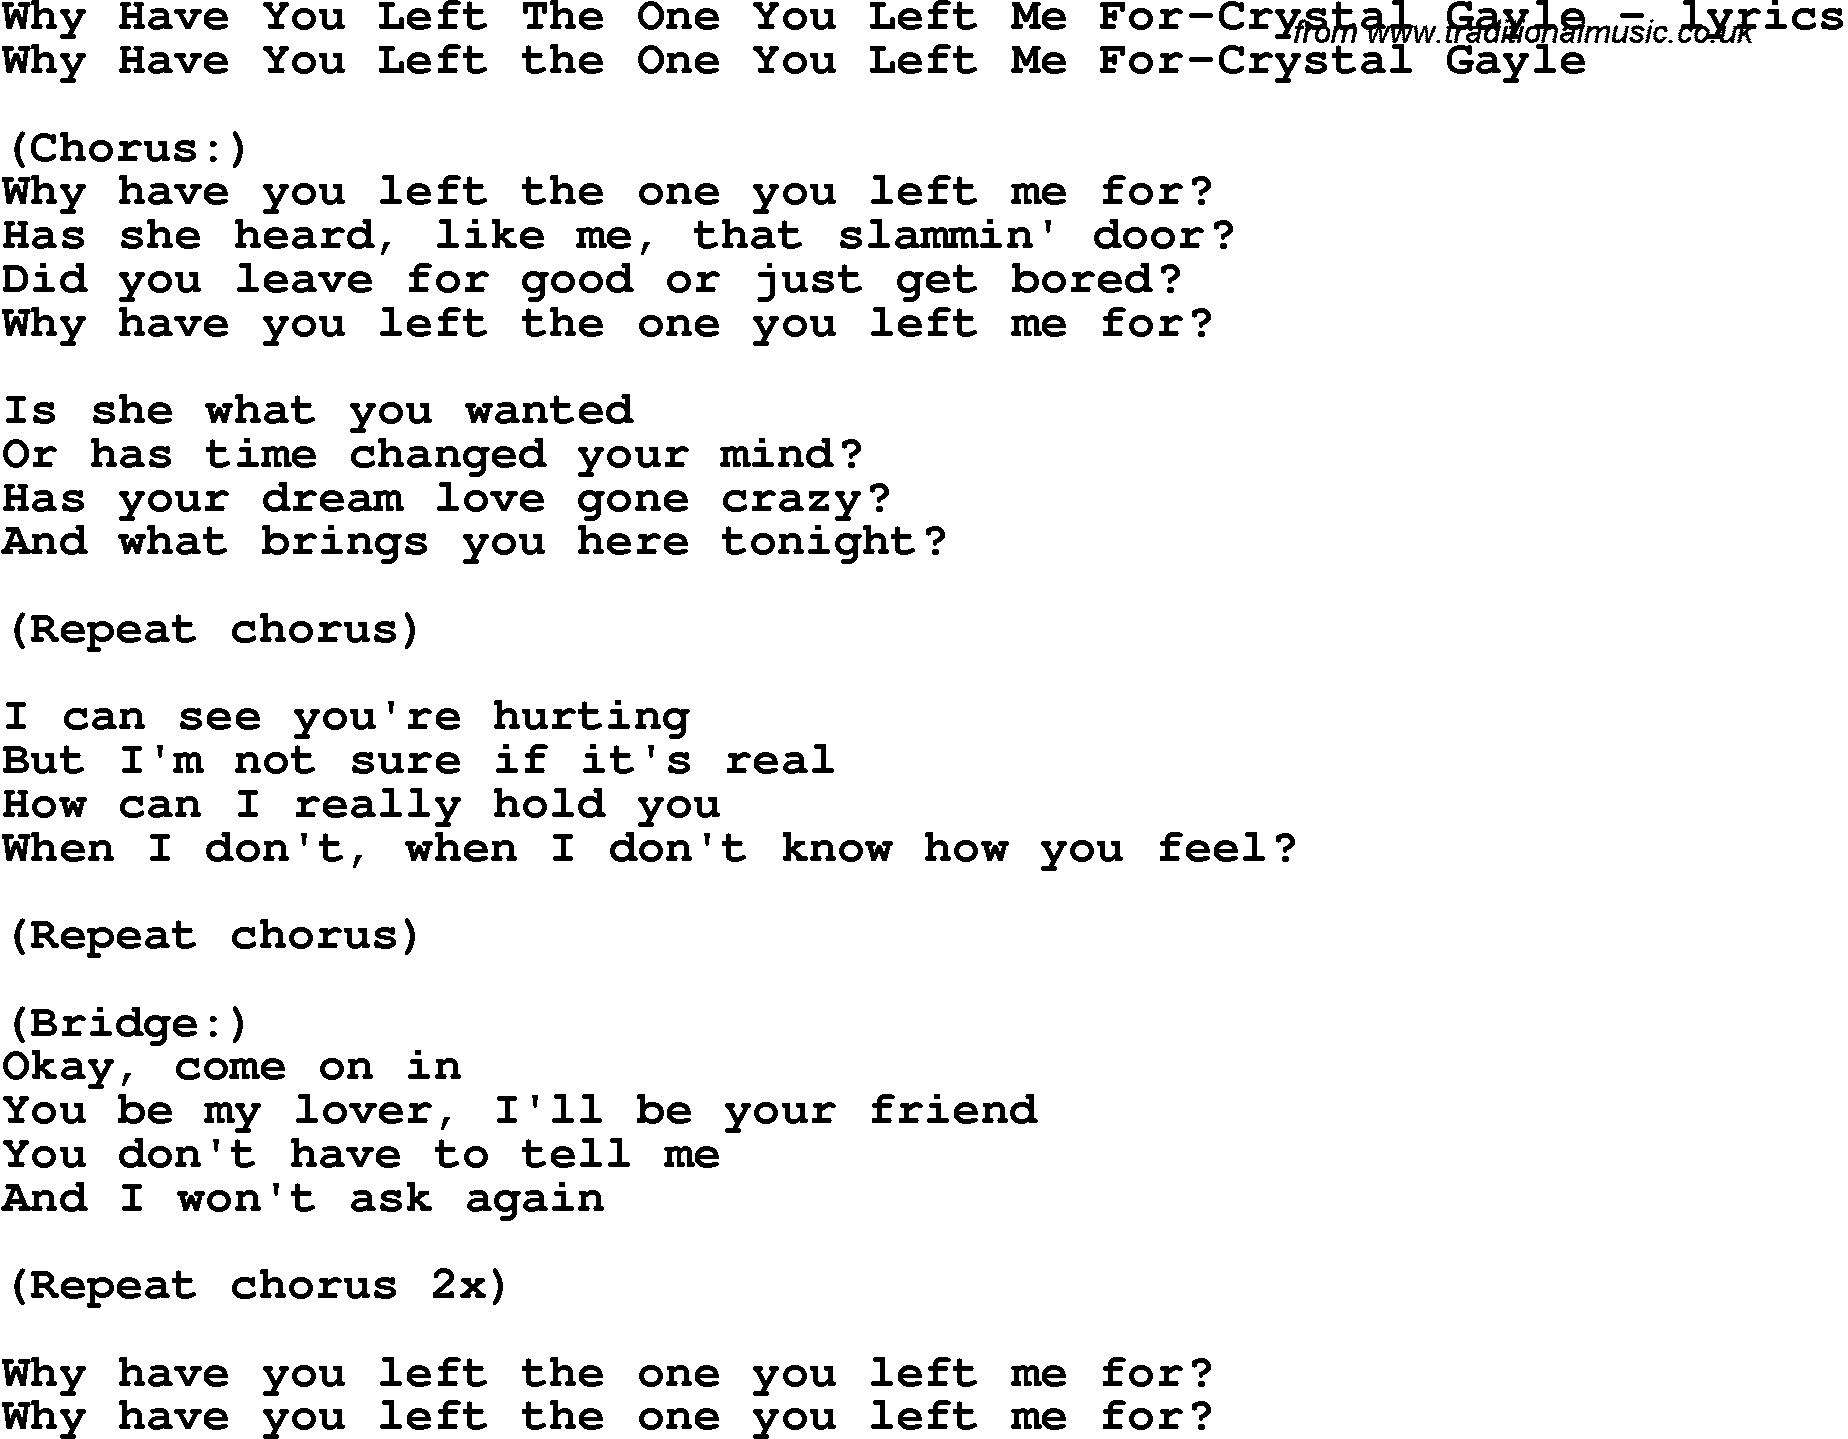 Love Song Lyrics for: Why Have You Left The One You Left Me For-Crystal Gayle